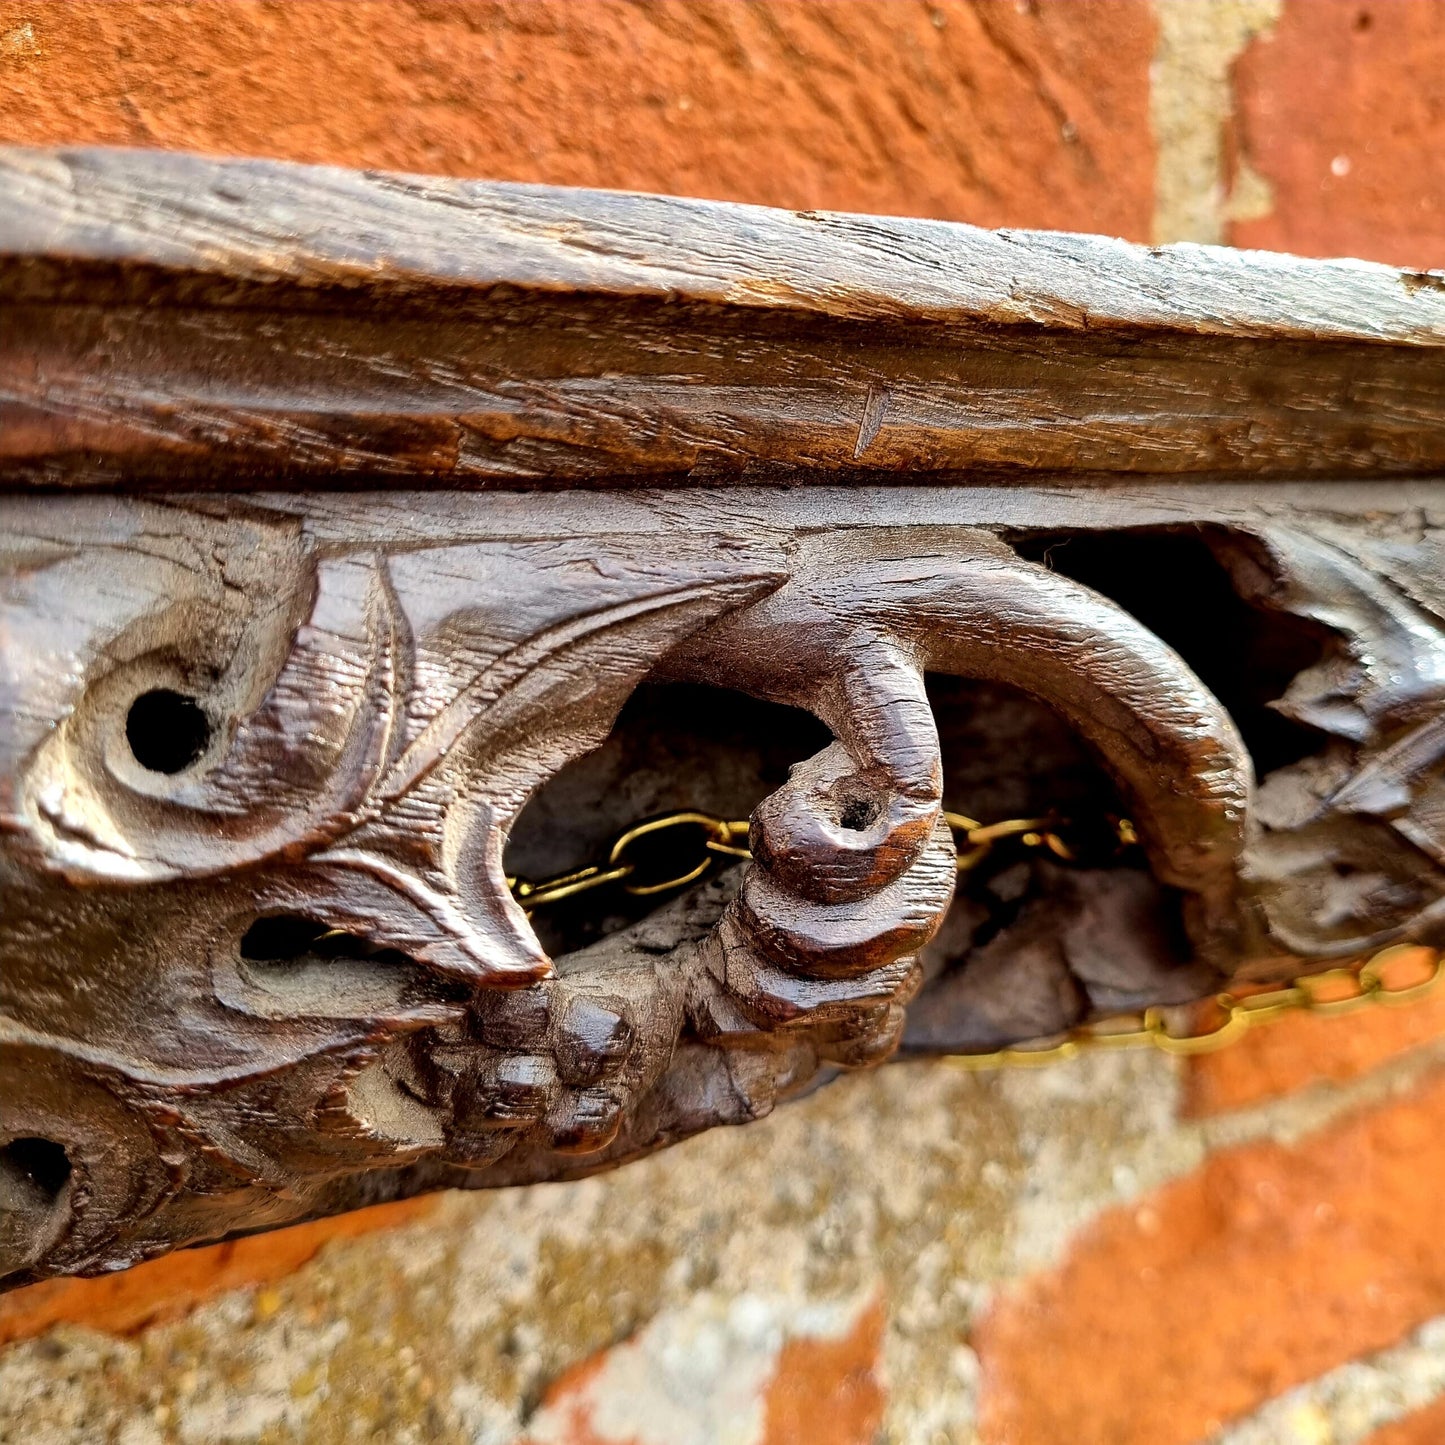 Late 15th Century / Early 16th Century Antique Carved Oak Fragment / Rail Depicting Foliage and Fruit